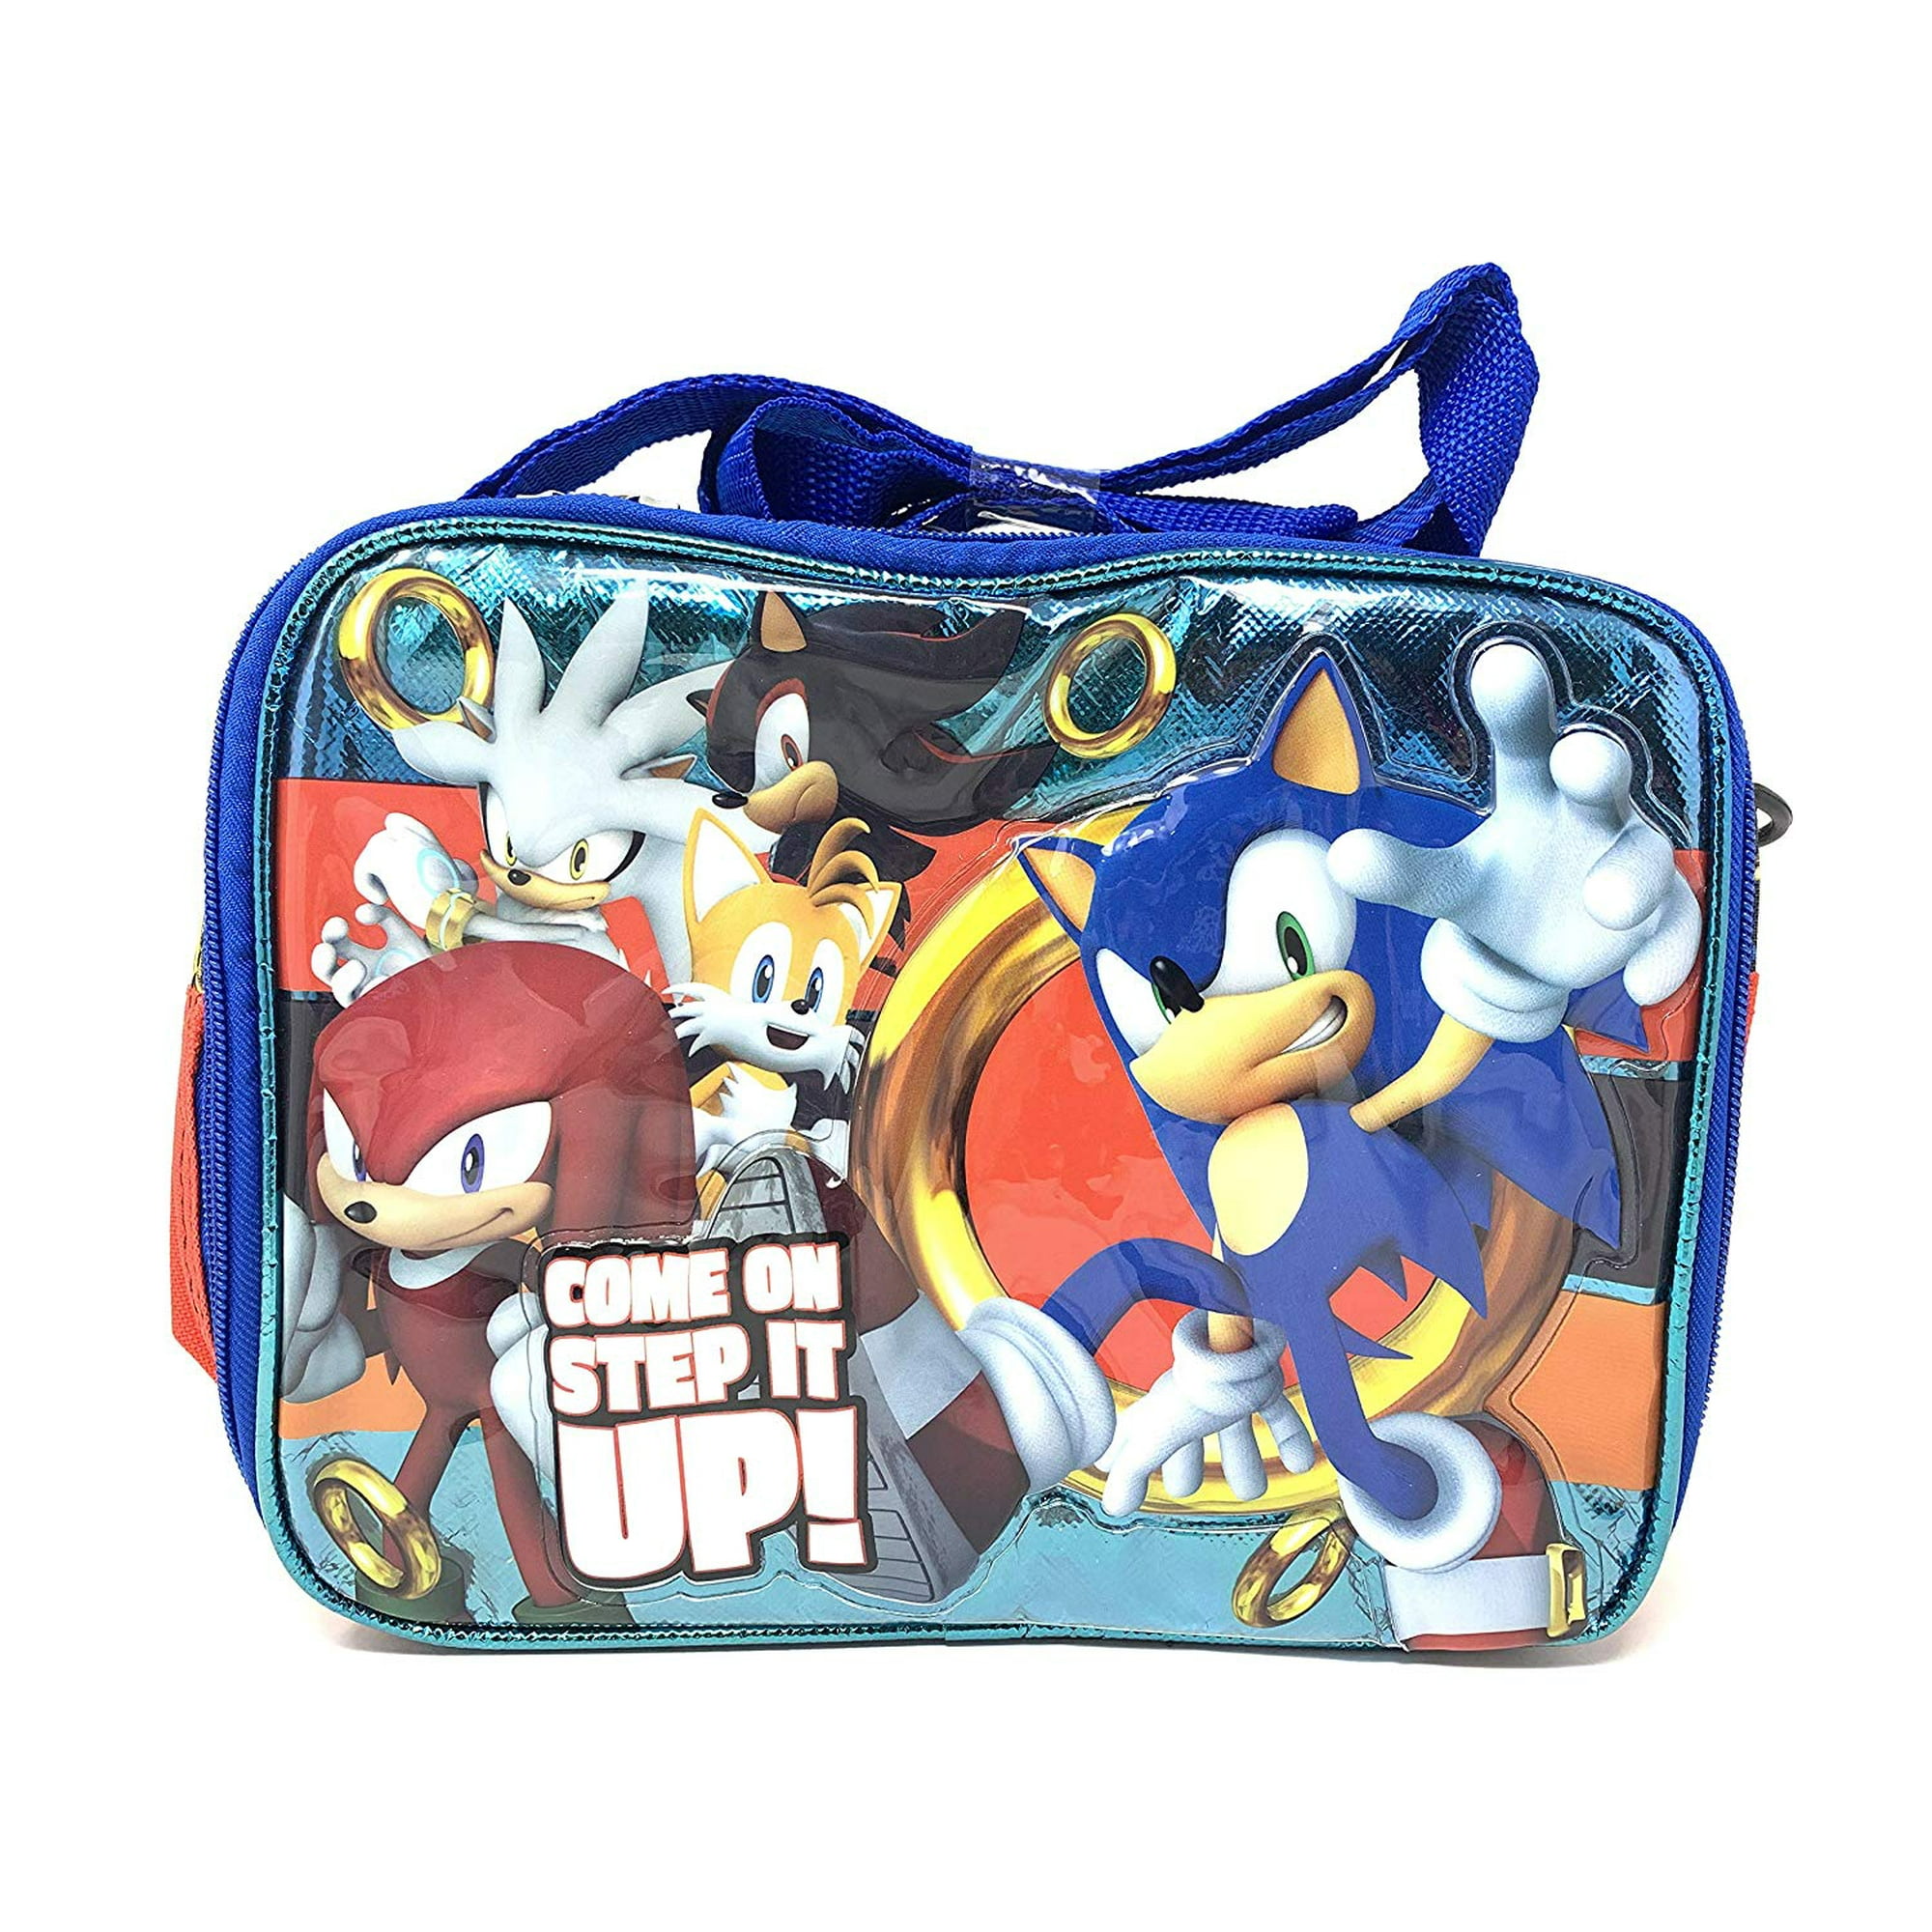 Lunch Bag - Sonic the Hedgehog - Come On Step It UP New 202150 | Walmart  Canada